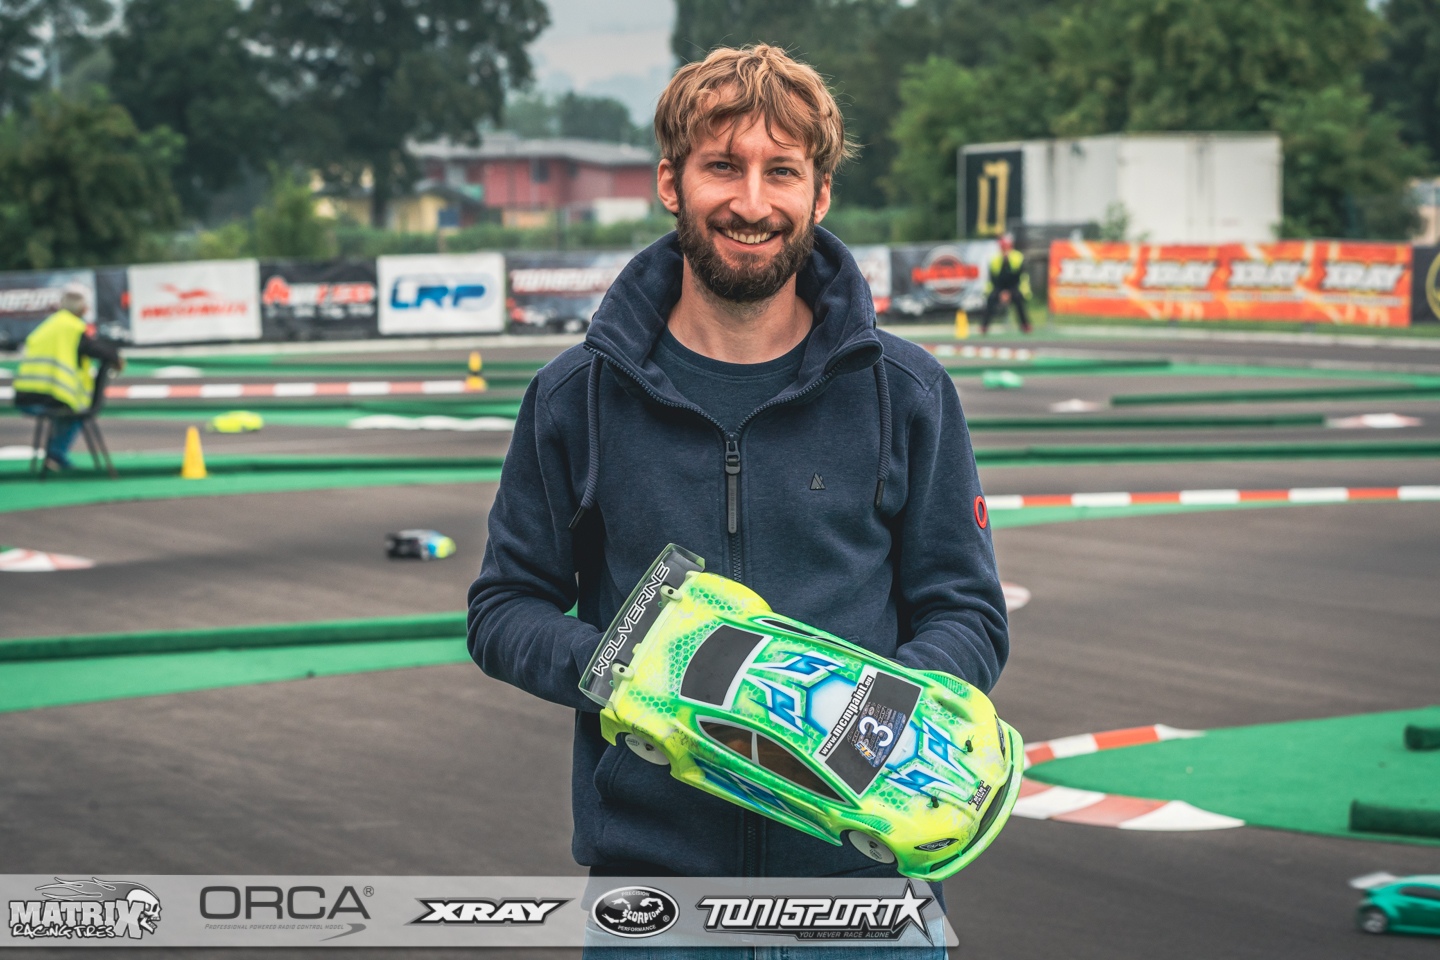 ETS Champions Interview with Thomas Bemmerl – Orca 17.5 Stock Champion, Season #14 2021/22